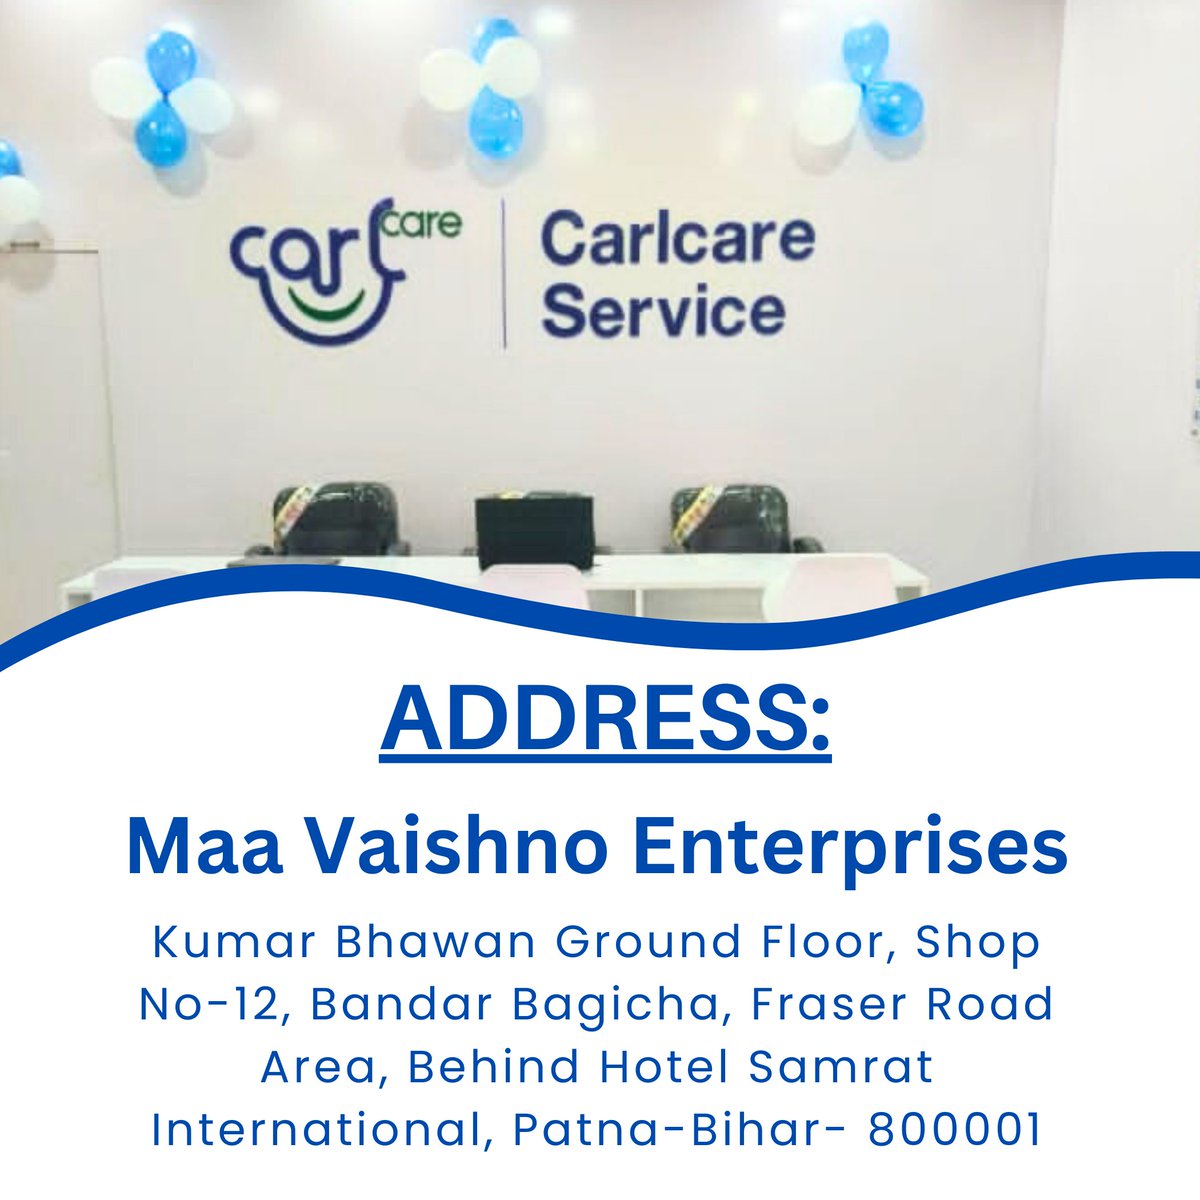 We're thrilled to announce the grand opening of the Tecno Authorized Service Centre, powered by Carlcare Service. Now, experience top-notch repairs and service for your Tecno devices in Patna, Bihar.

#tecnomobile #techsolutions #CarlcareService #Carlcare #patna #bihar